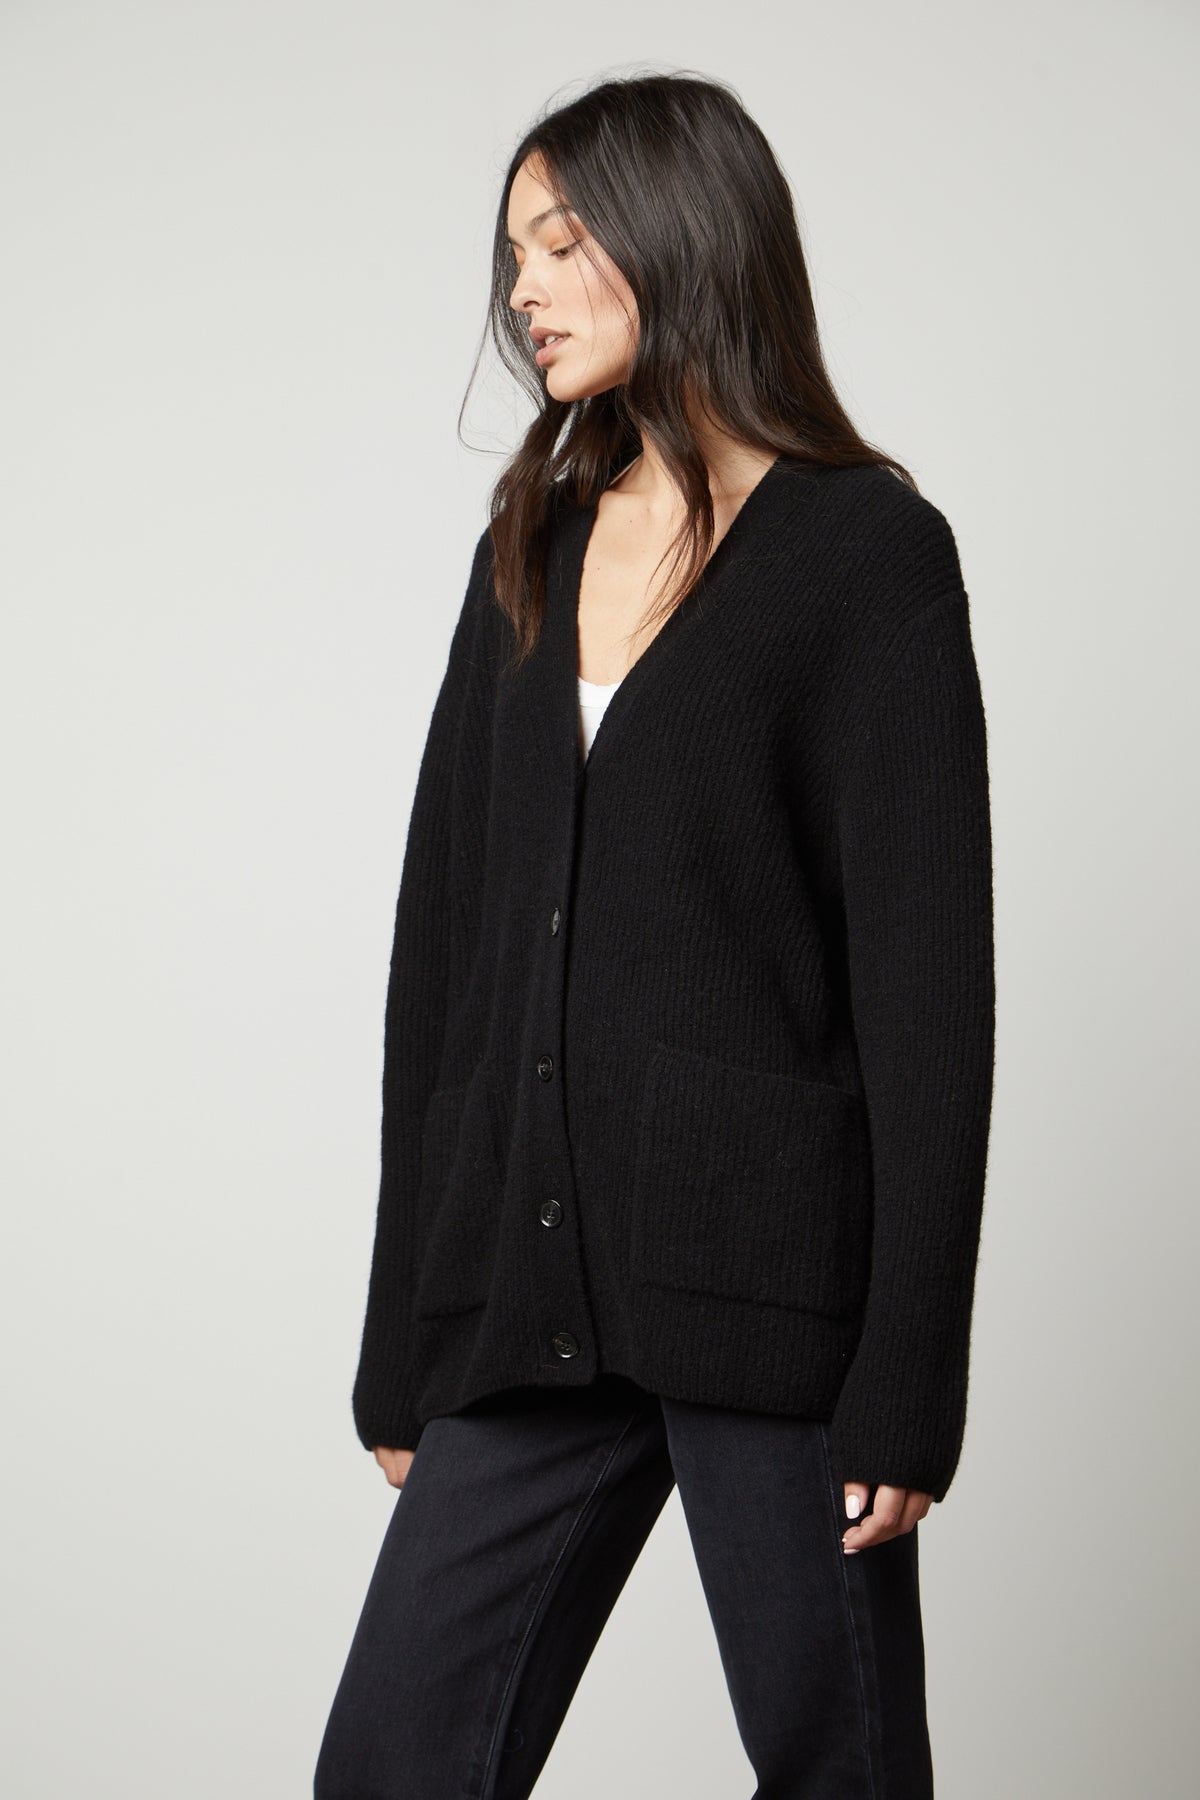 A woman wearing a black Velvet by Graham & Spencer BRITT OVERSIZED CARDIGAN and jeans.-26897709433025